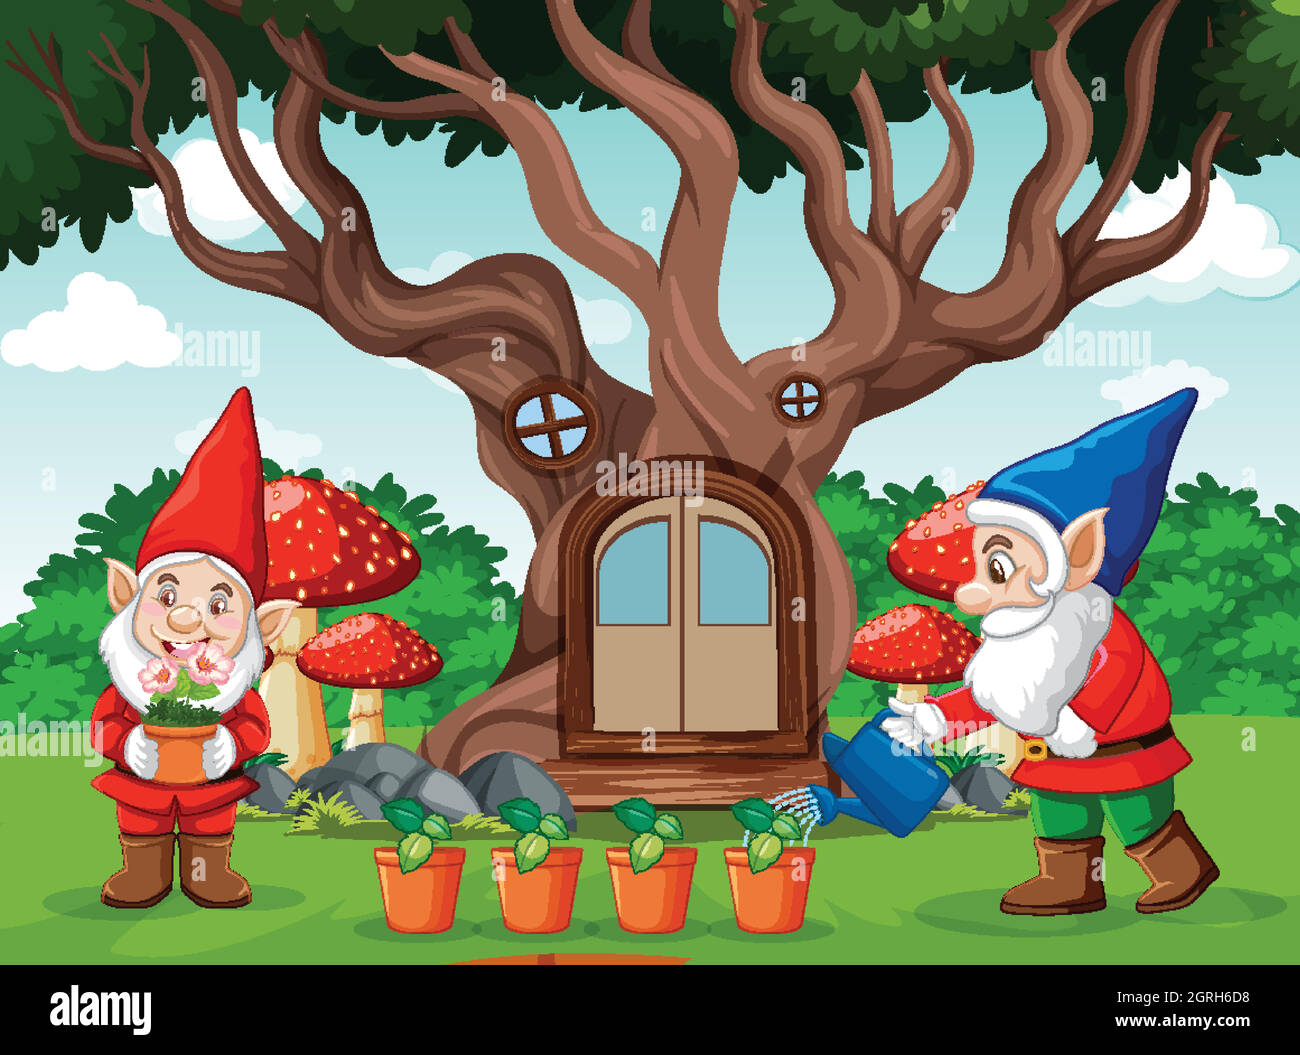 Gnomes and tree house cartoon style on garden background Stock Vector